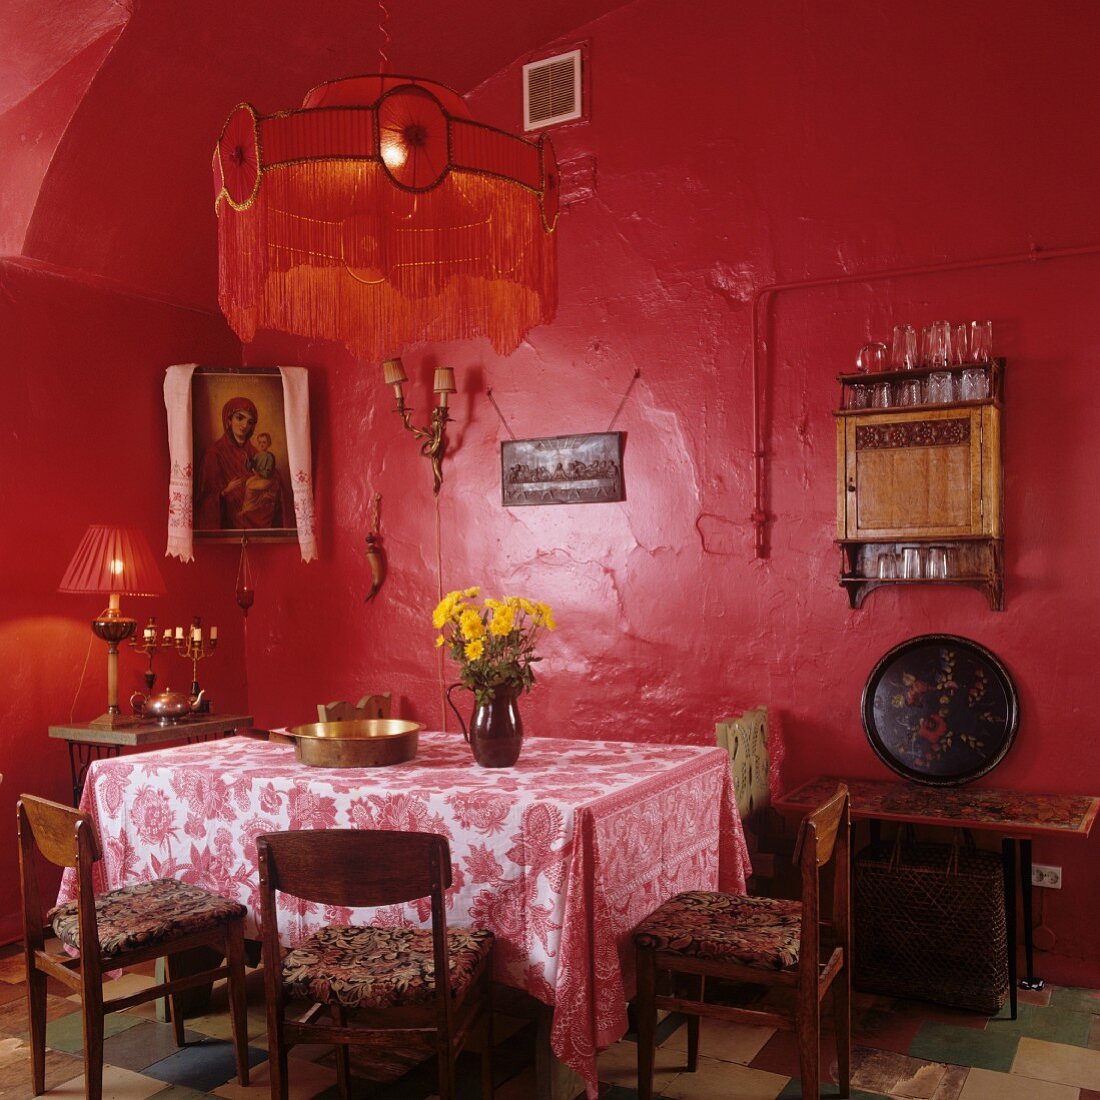 Simple dining room in red - table cloth on table below pendant lamp with fringed lampshade and red-painted walls